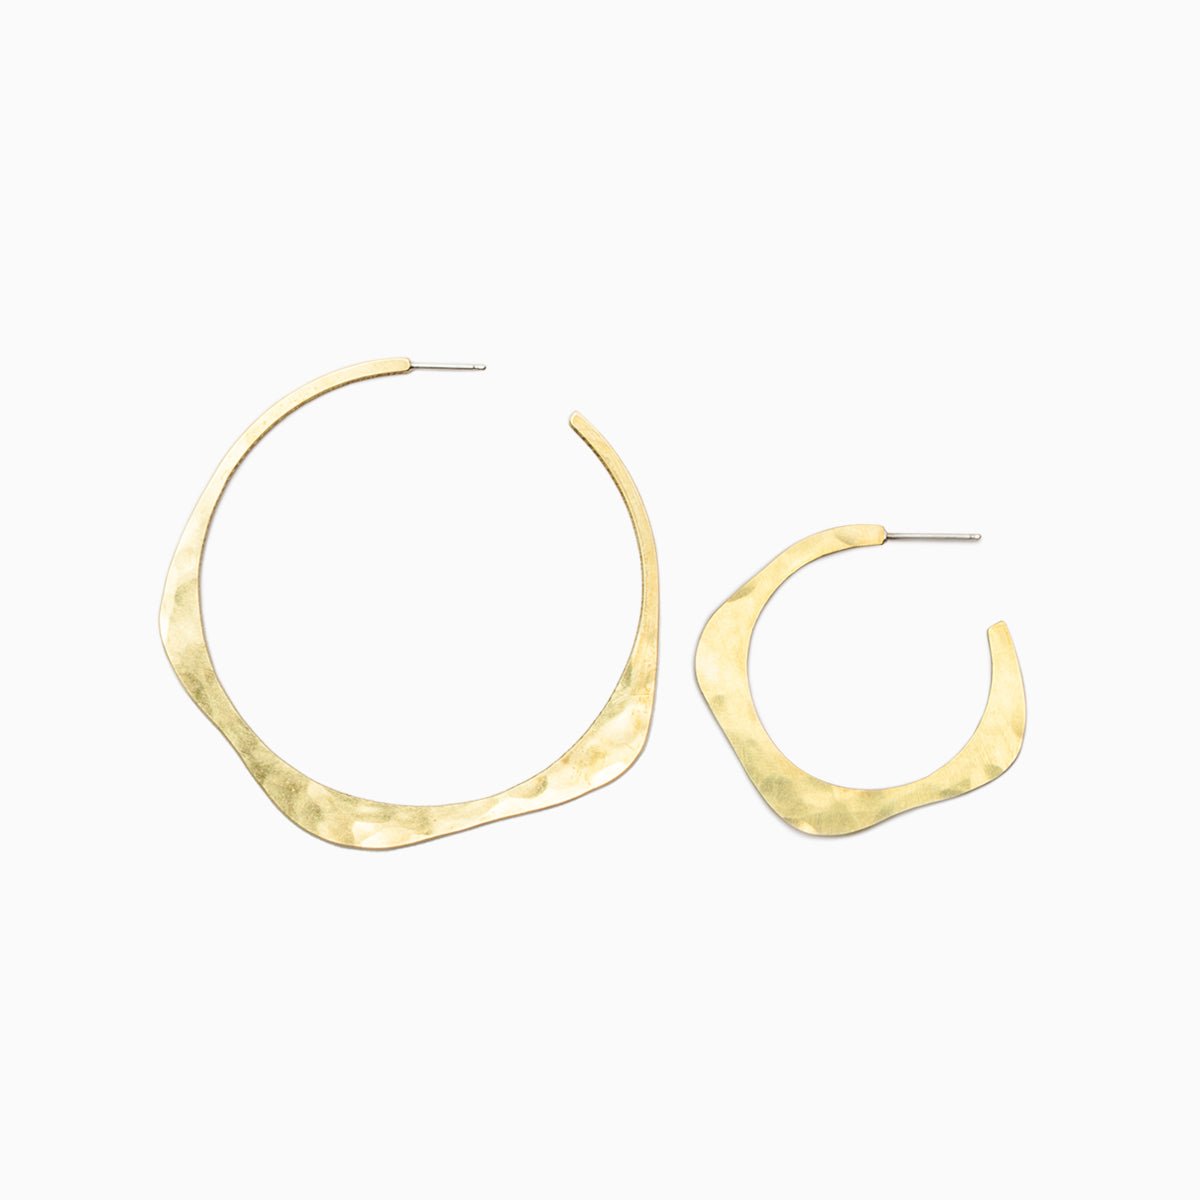 The left earring is the large version of the brass Doble Hoop Earrings. The right earring is a small version of the Doble Hoop Earrings. Each earring is designed in a wave pattern and features hand hammered texture. The Doble Hoop Earrings are designed and handcrafted in Portland, Oregon.